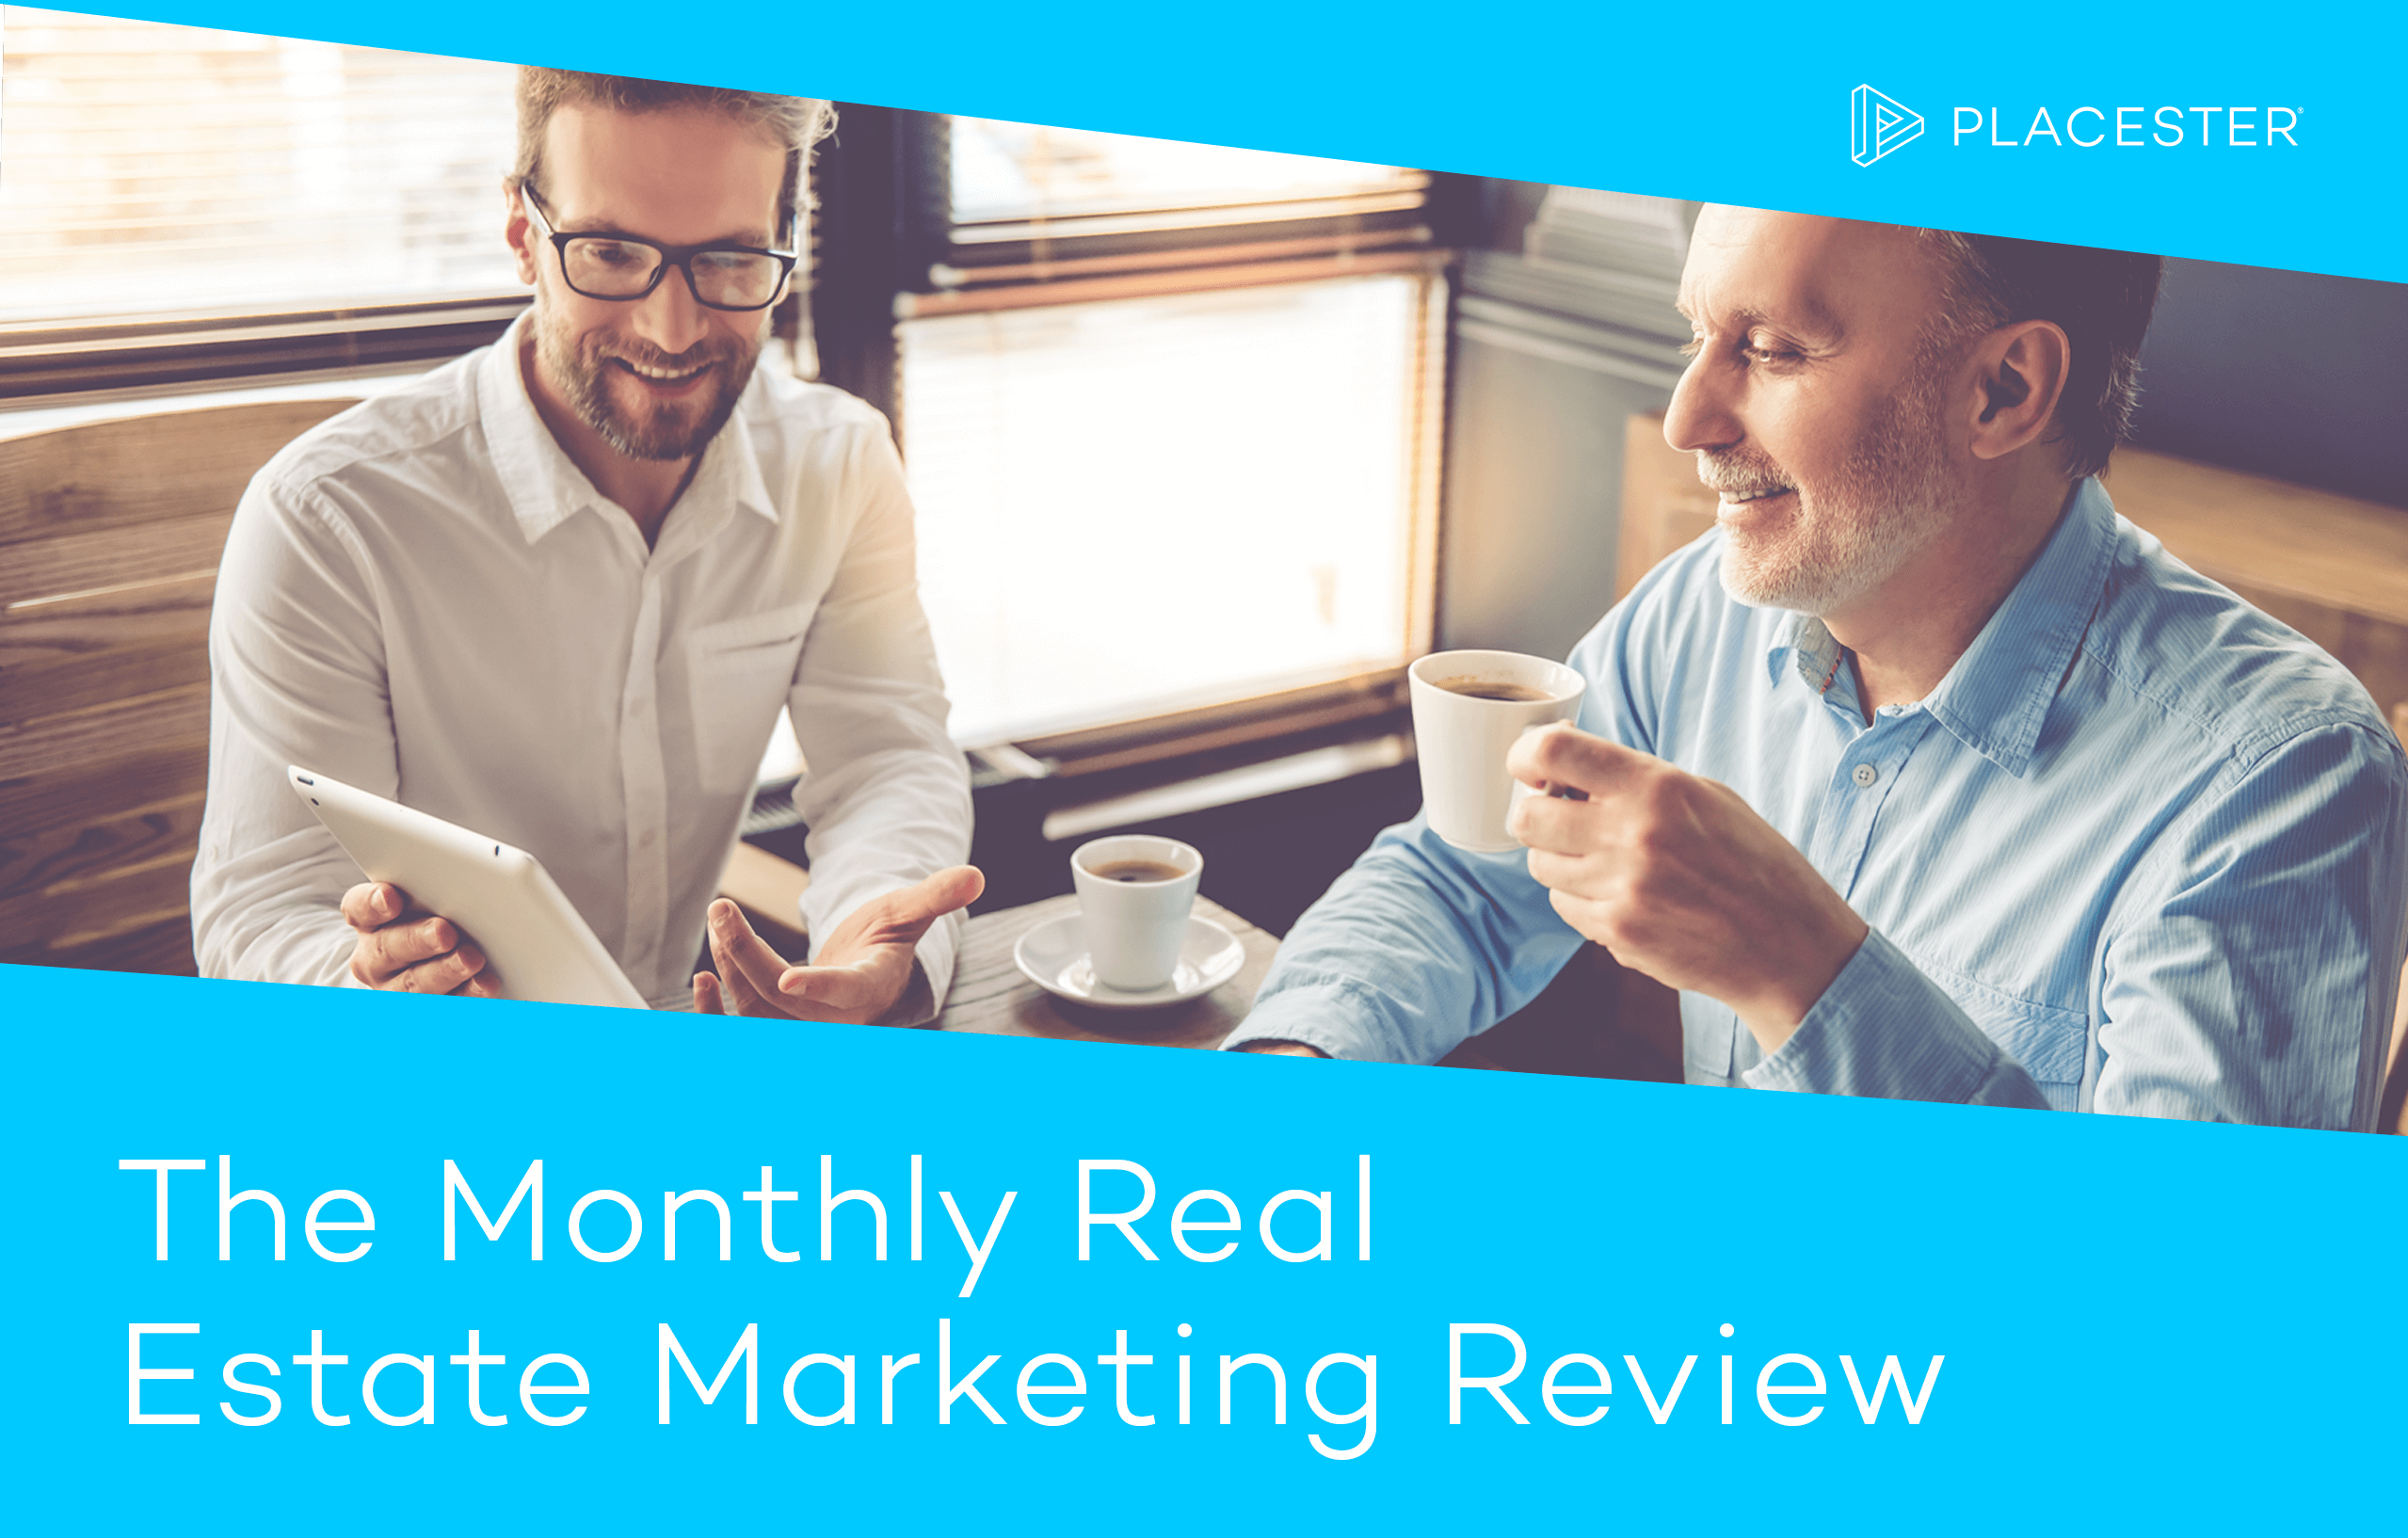 Monthly Real Estate Marketing Review: Inman News Study, Realtor Report, and More